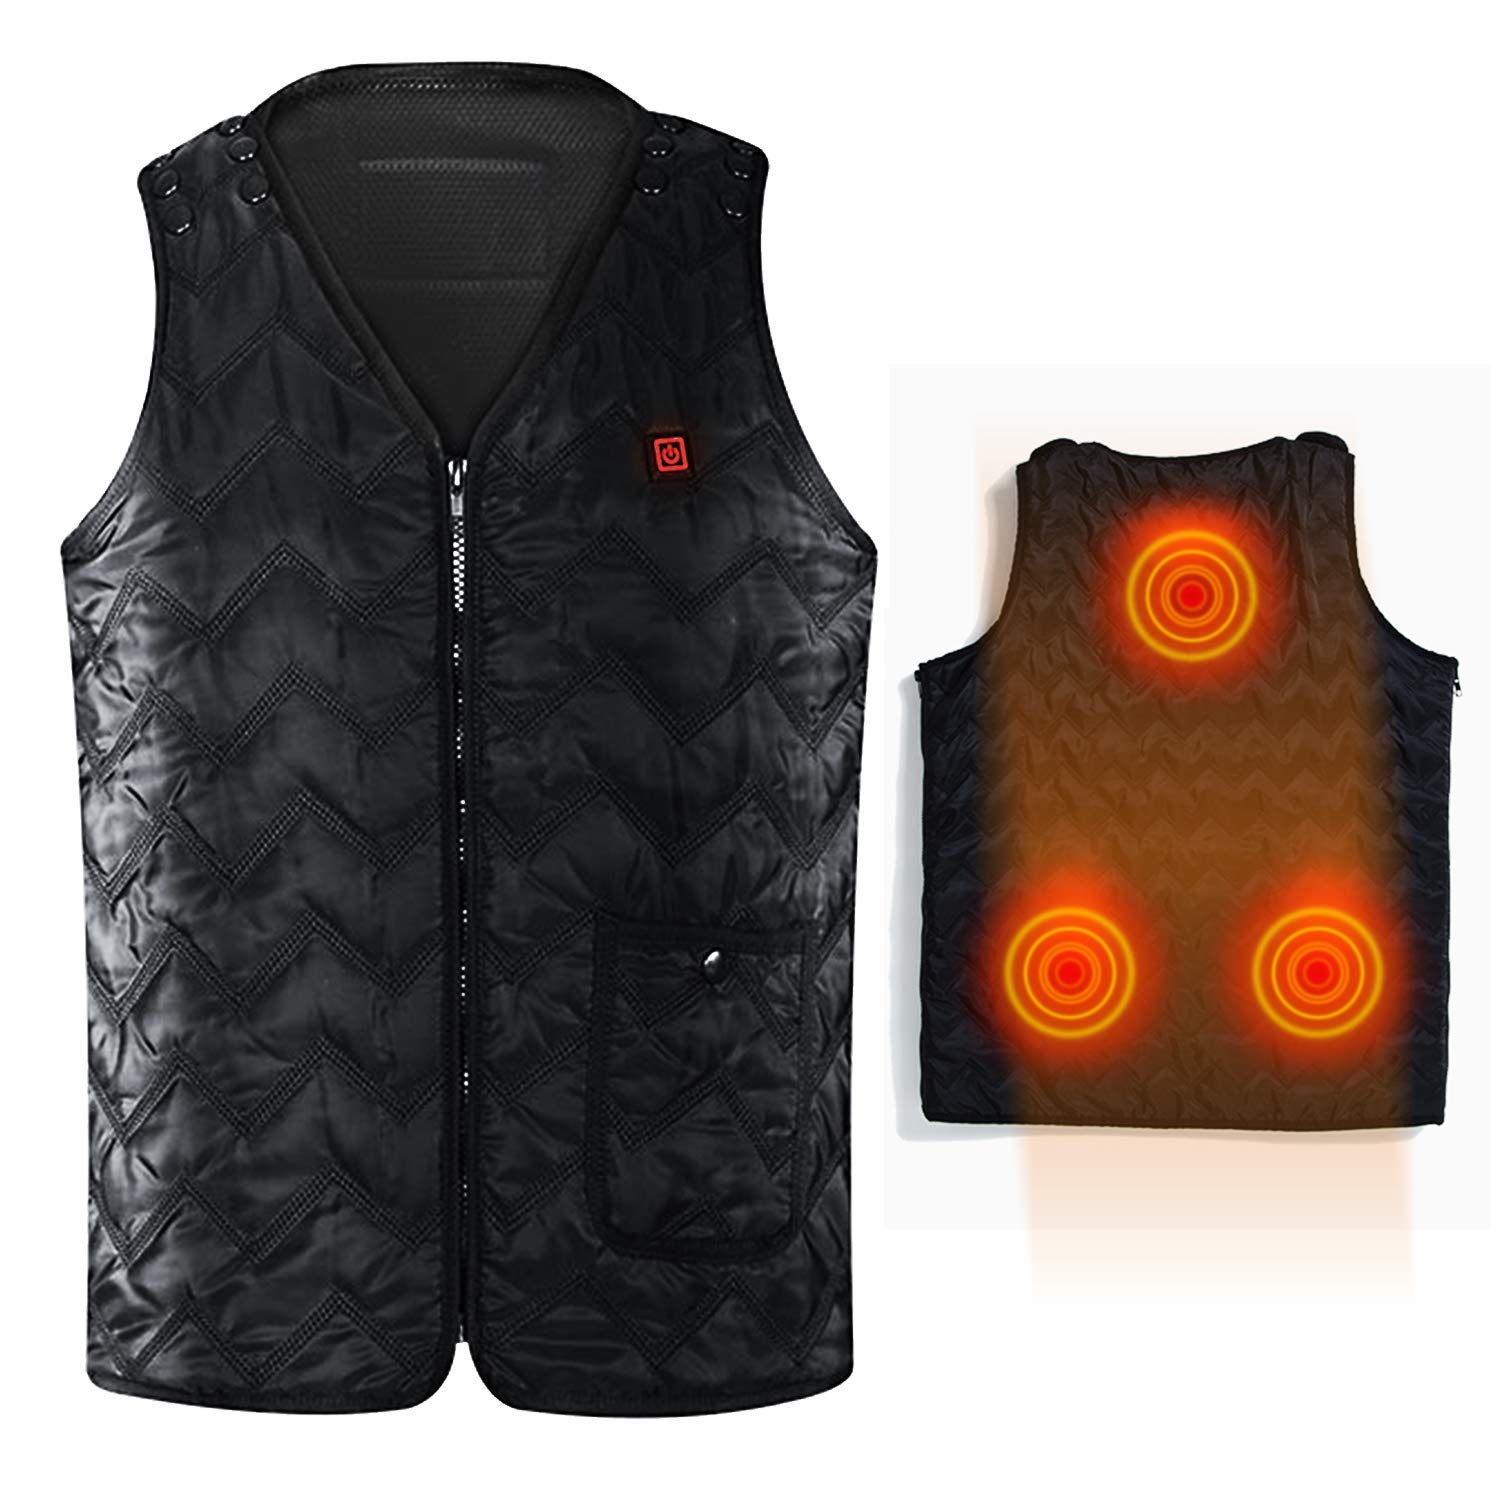 Best Heated Vests Reviewed & Rated for Warmth TheGearHunt